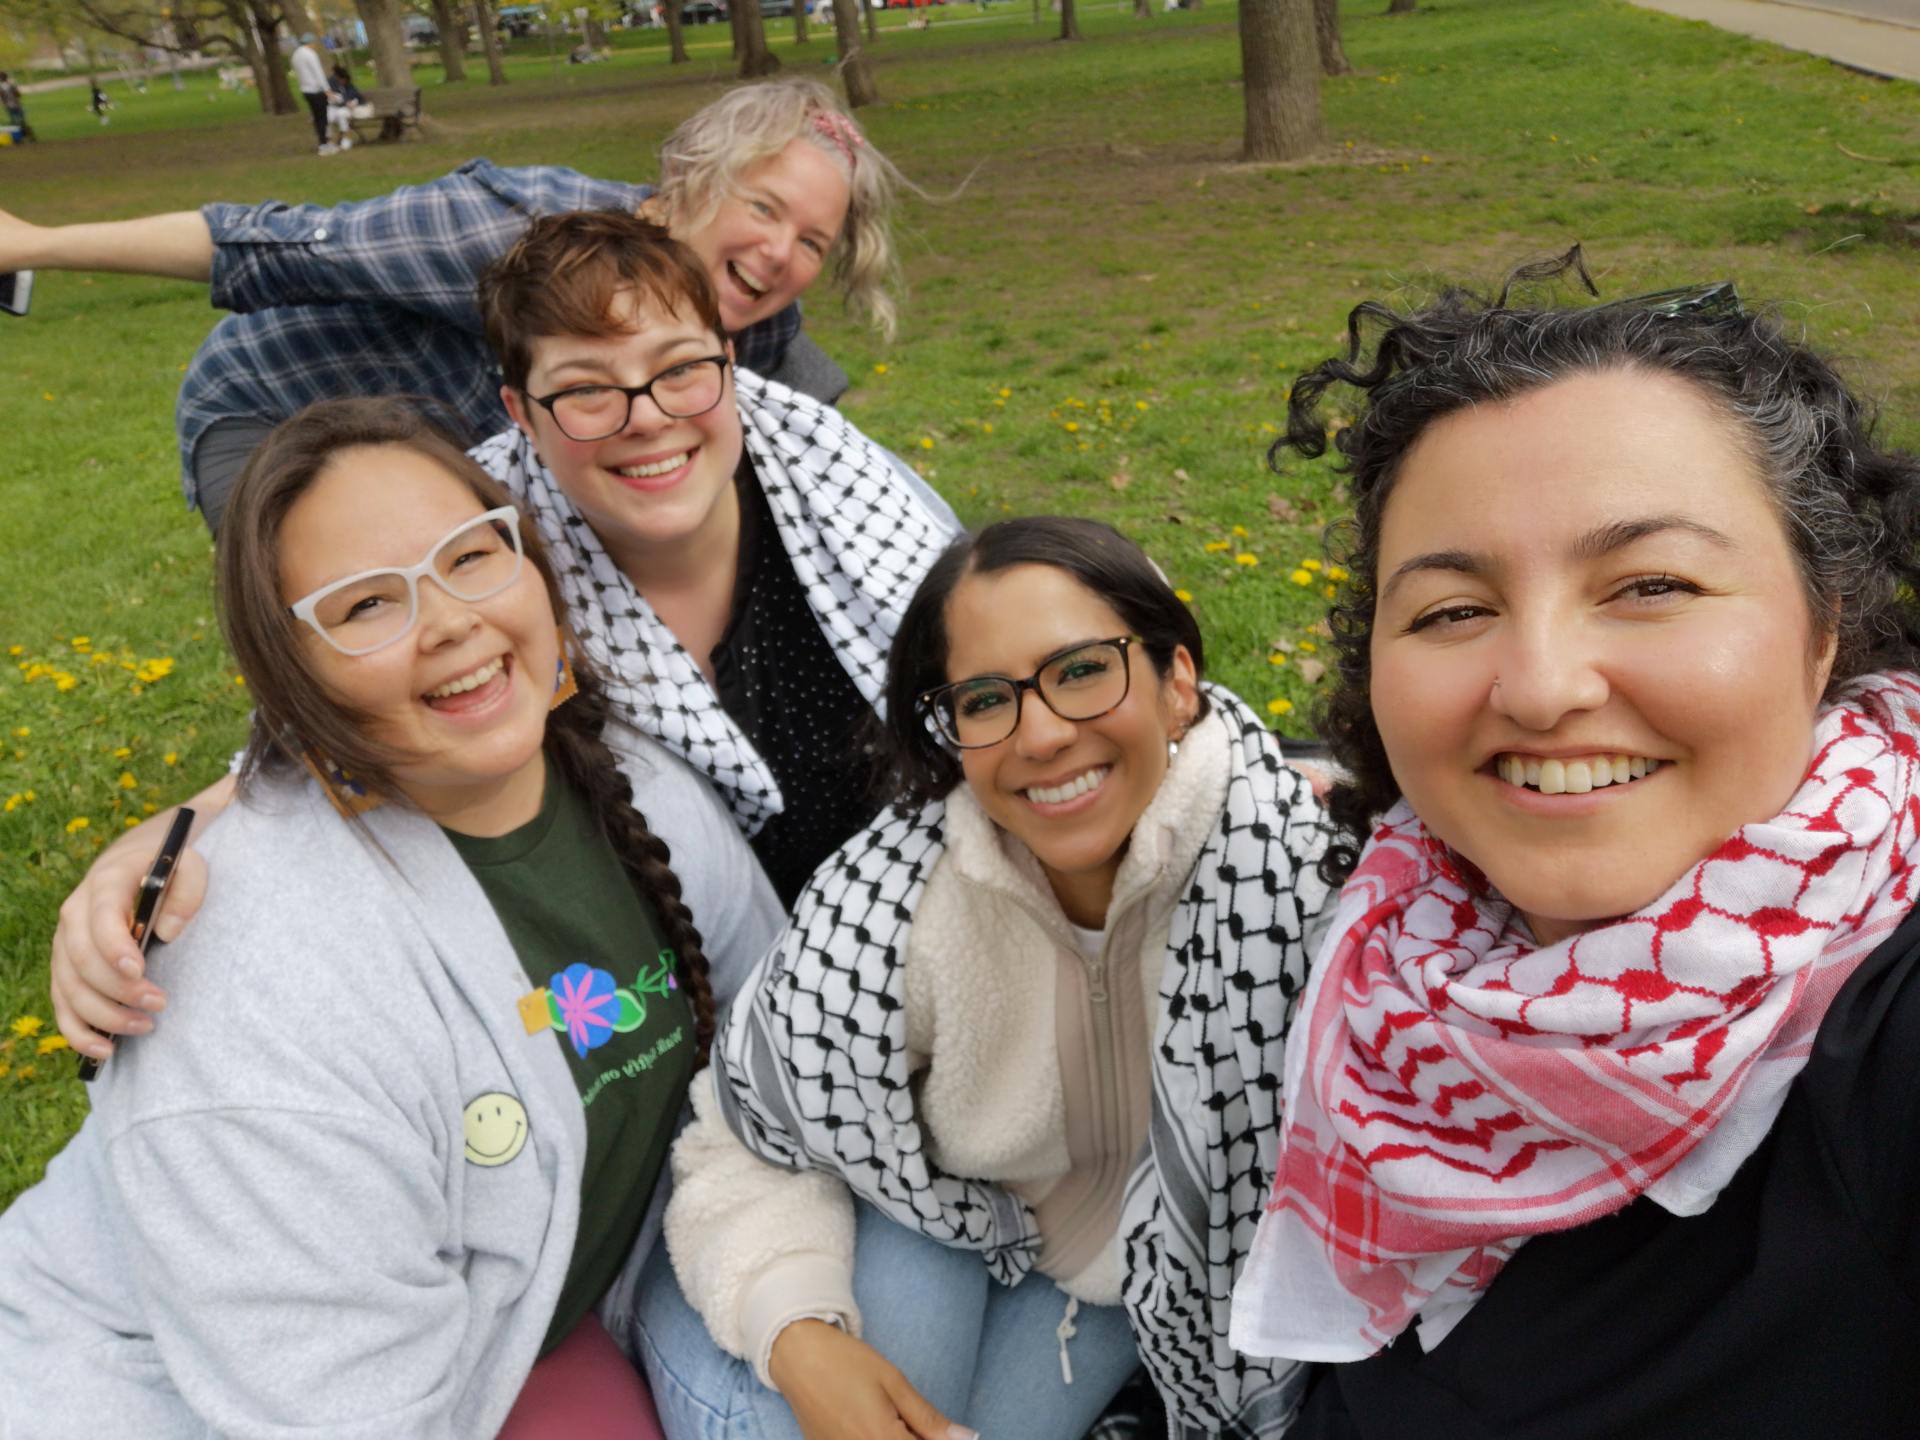 A group of women gathered together for a selfie outside